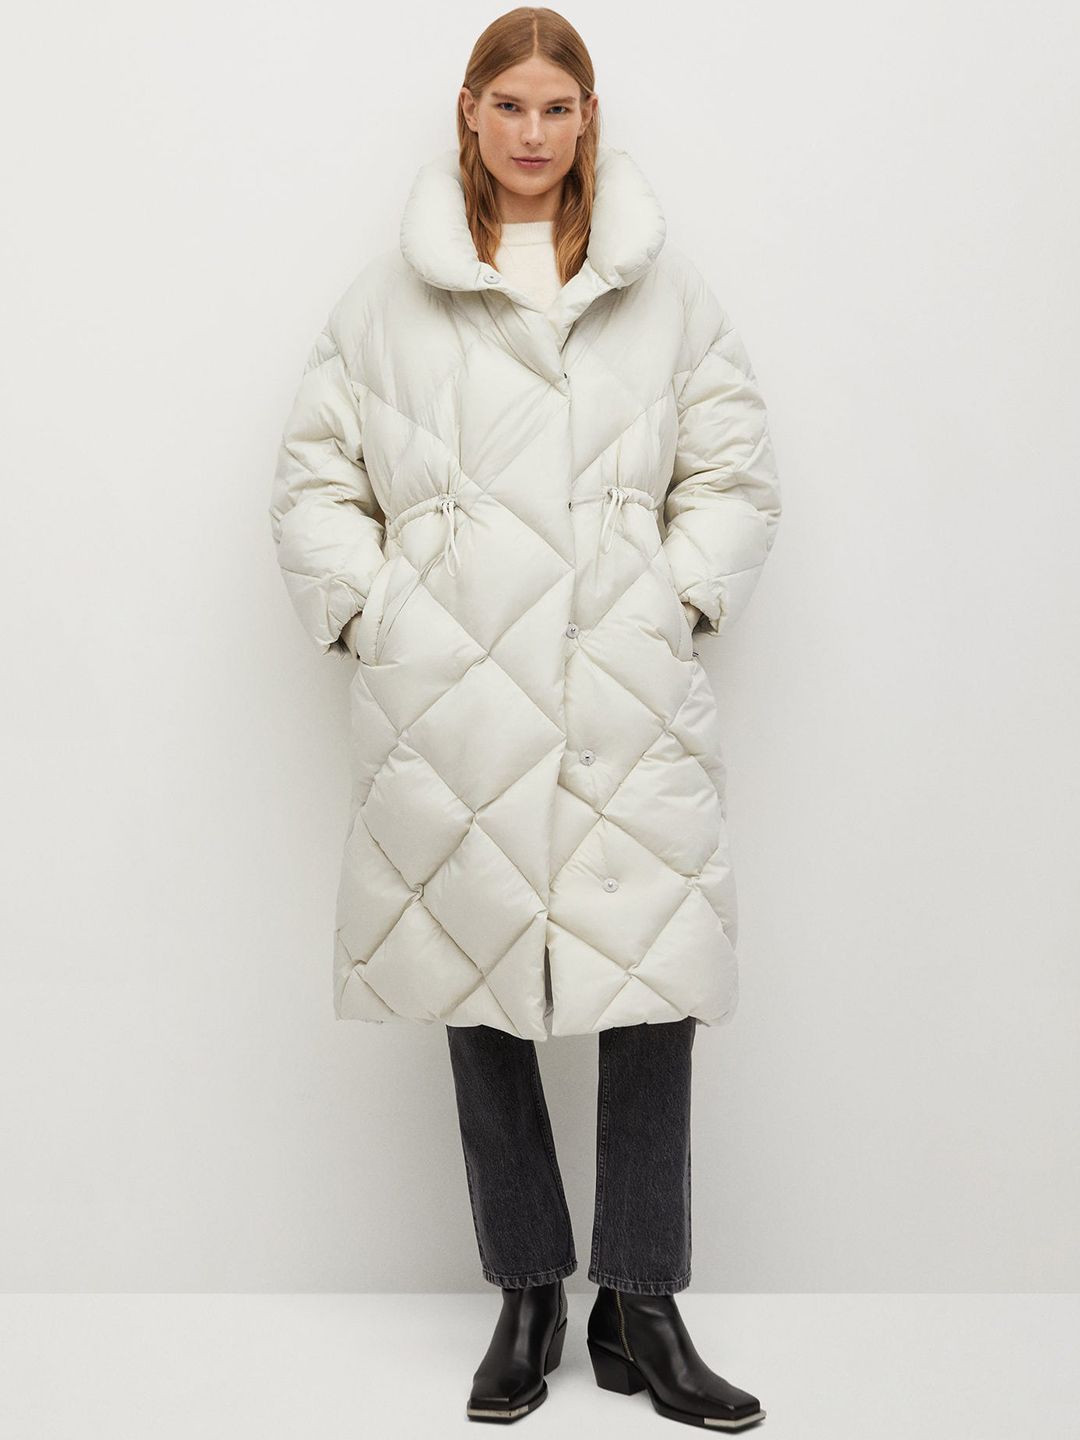 MANGO Women White Longline Quilted Jacket Price in India